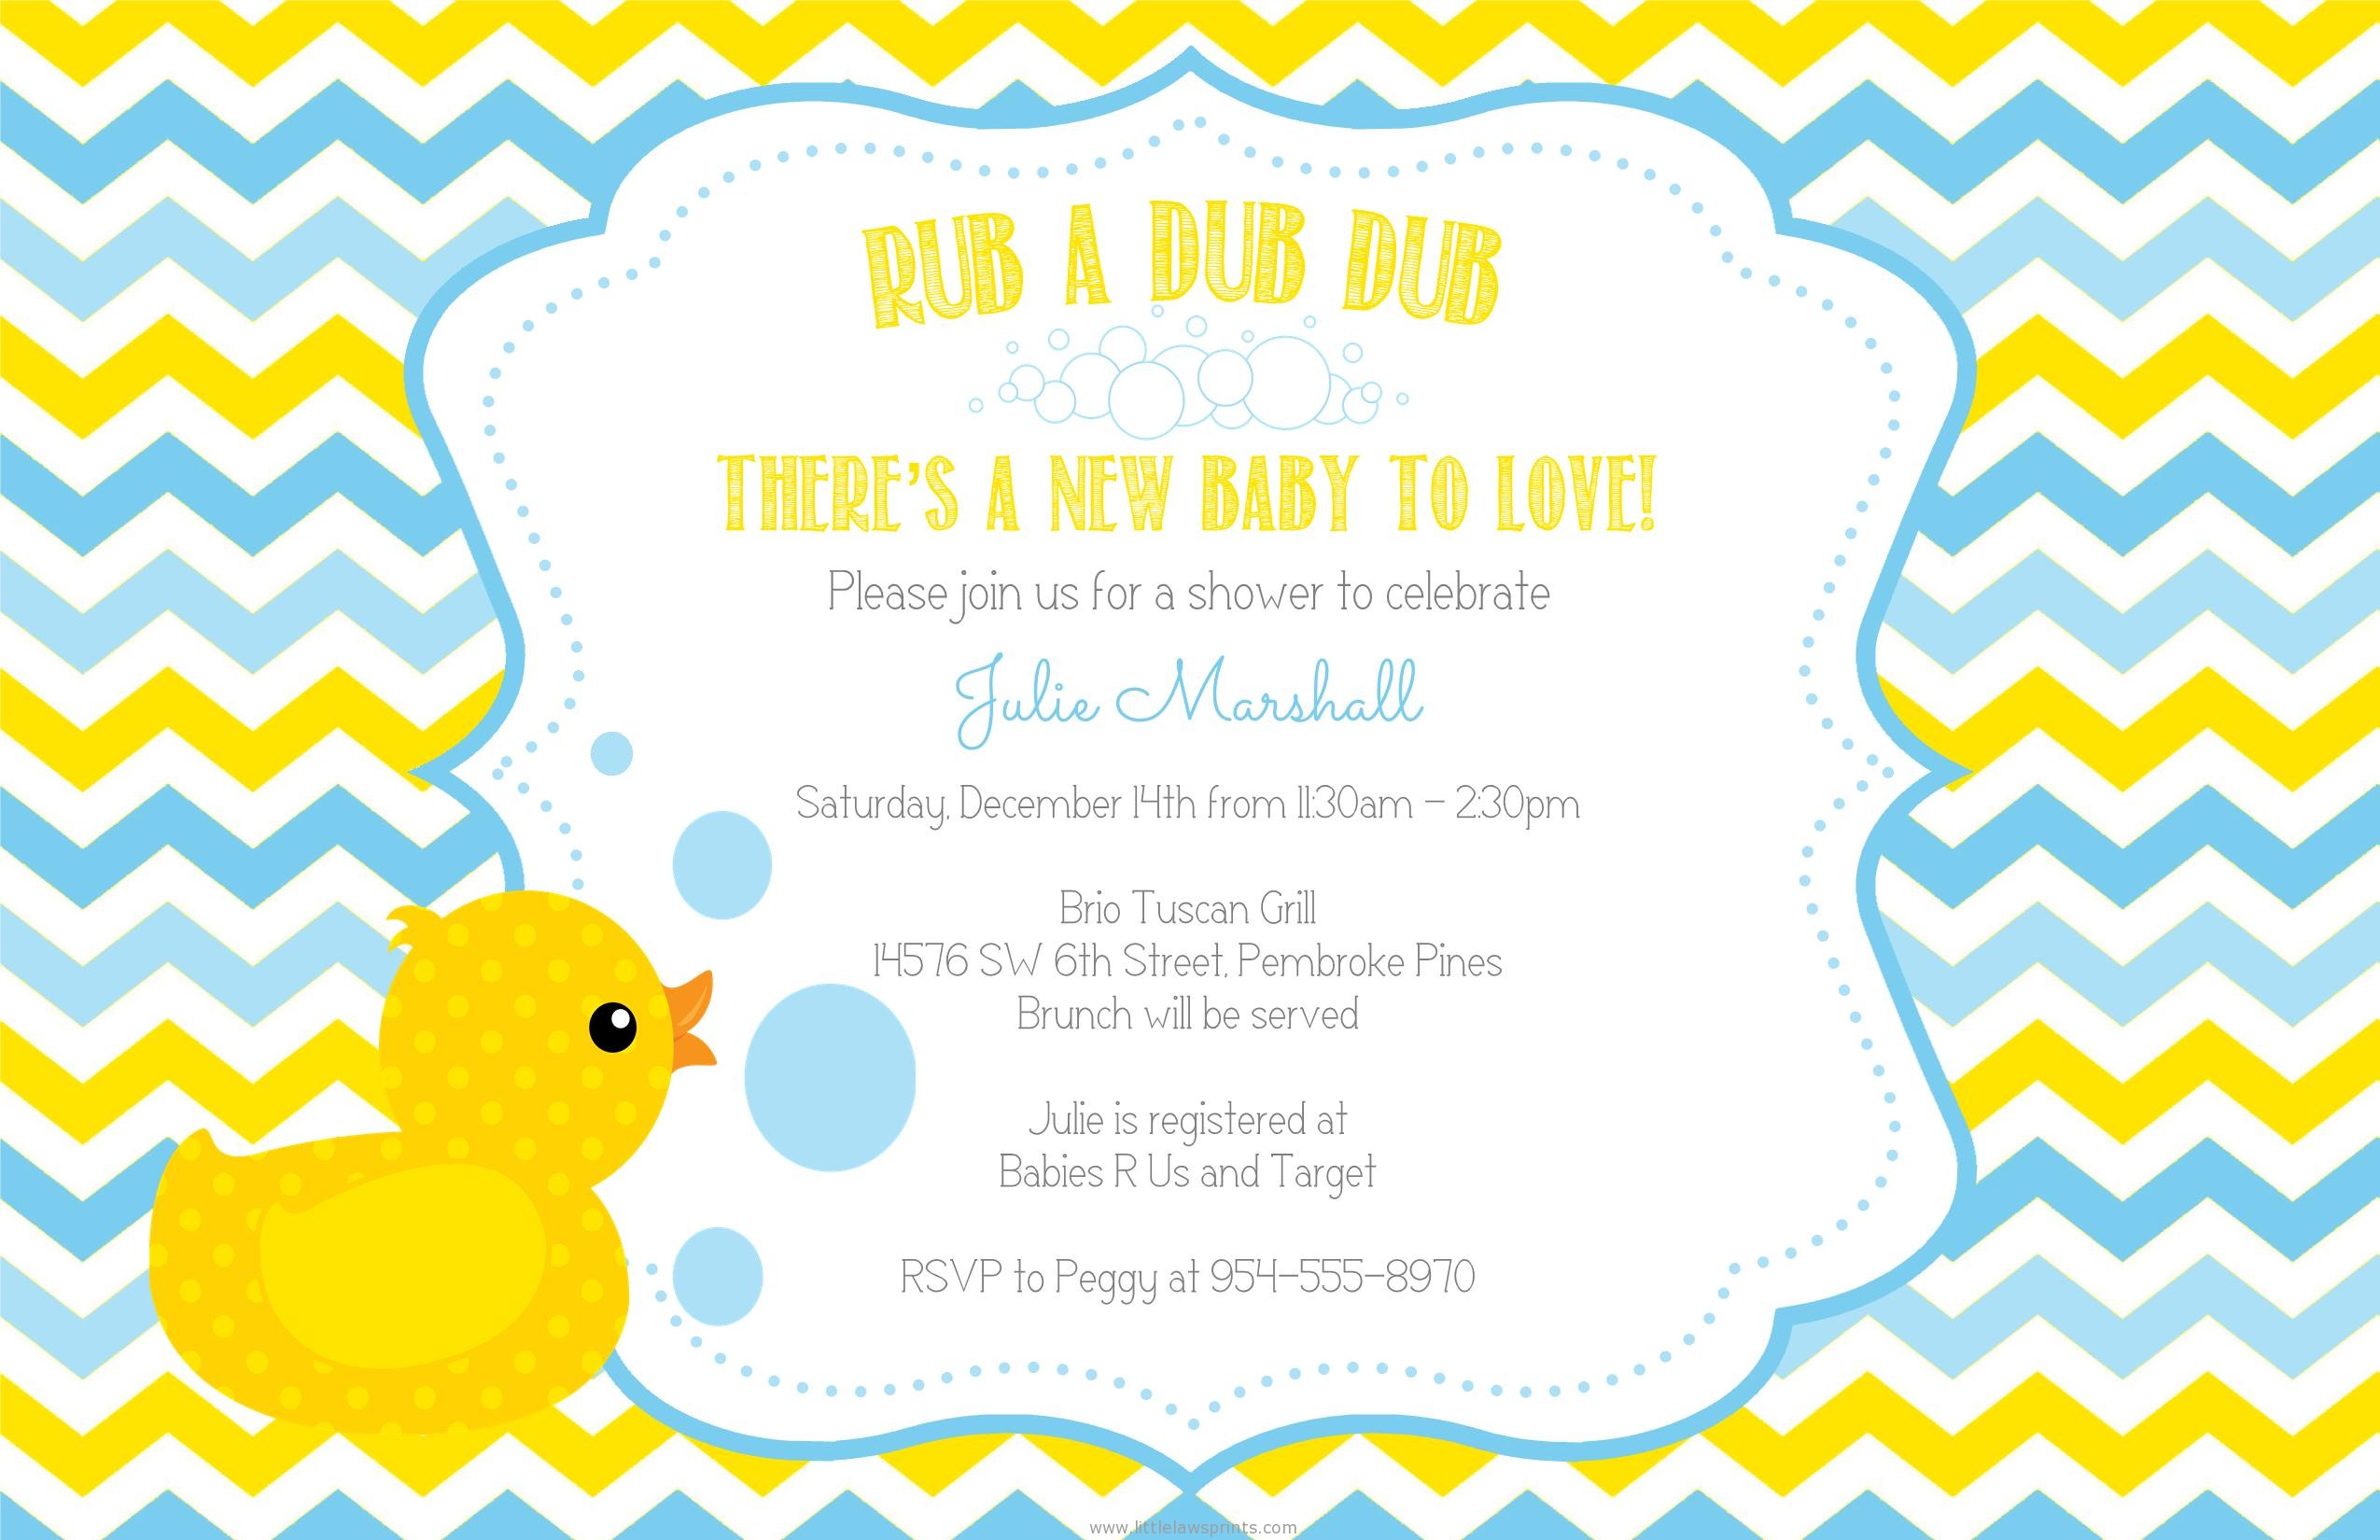 Rubber Ducky Invitations   Little Laws Prints